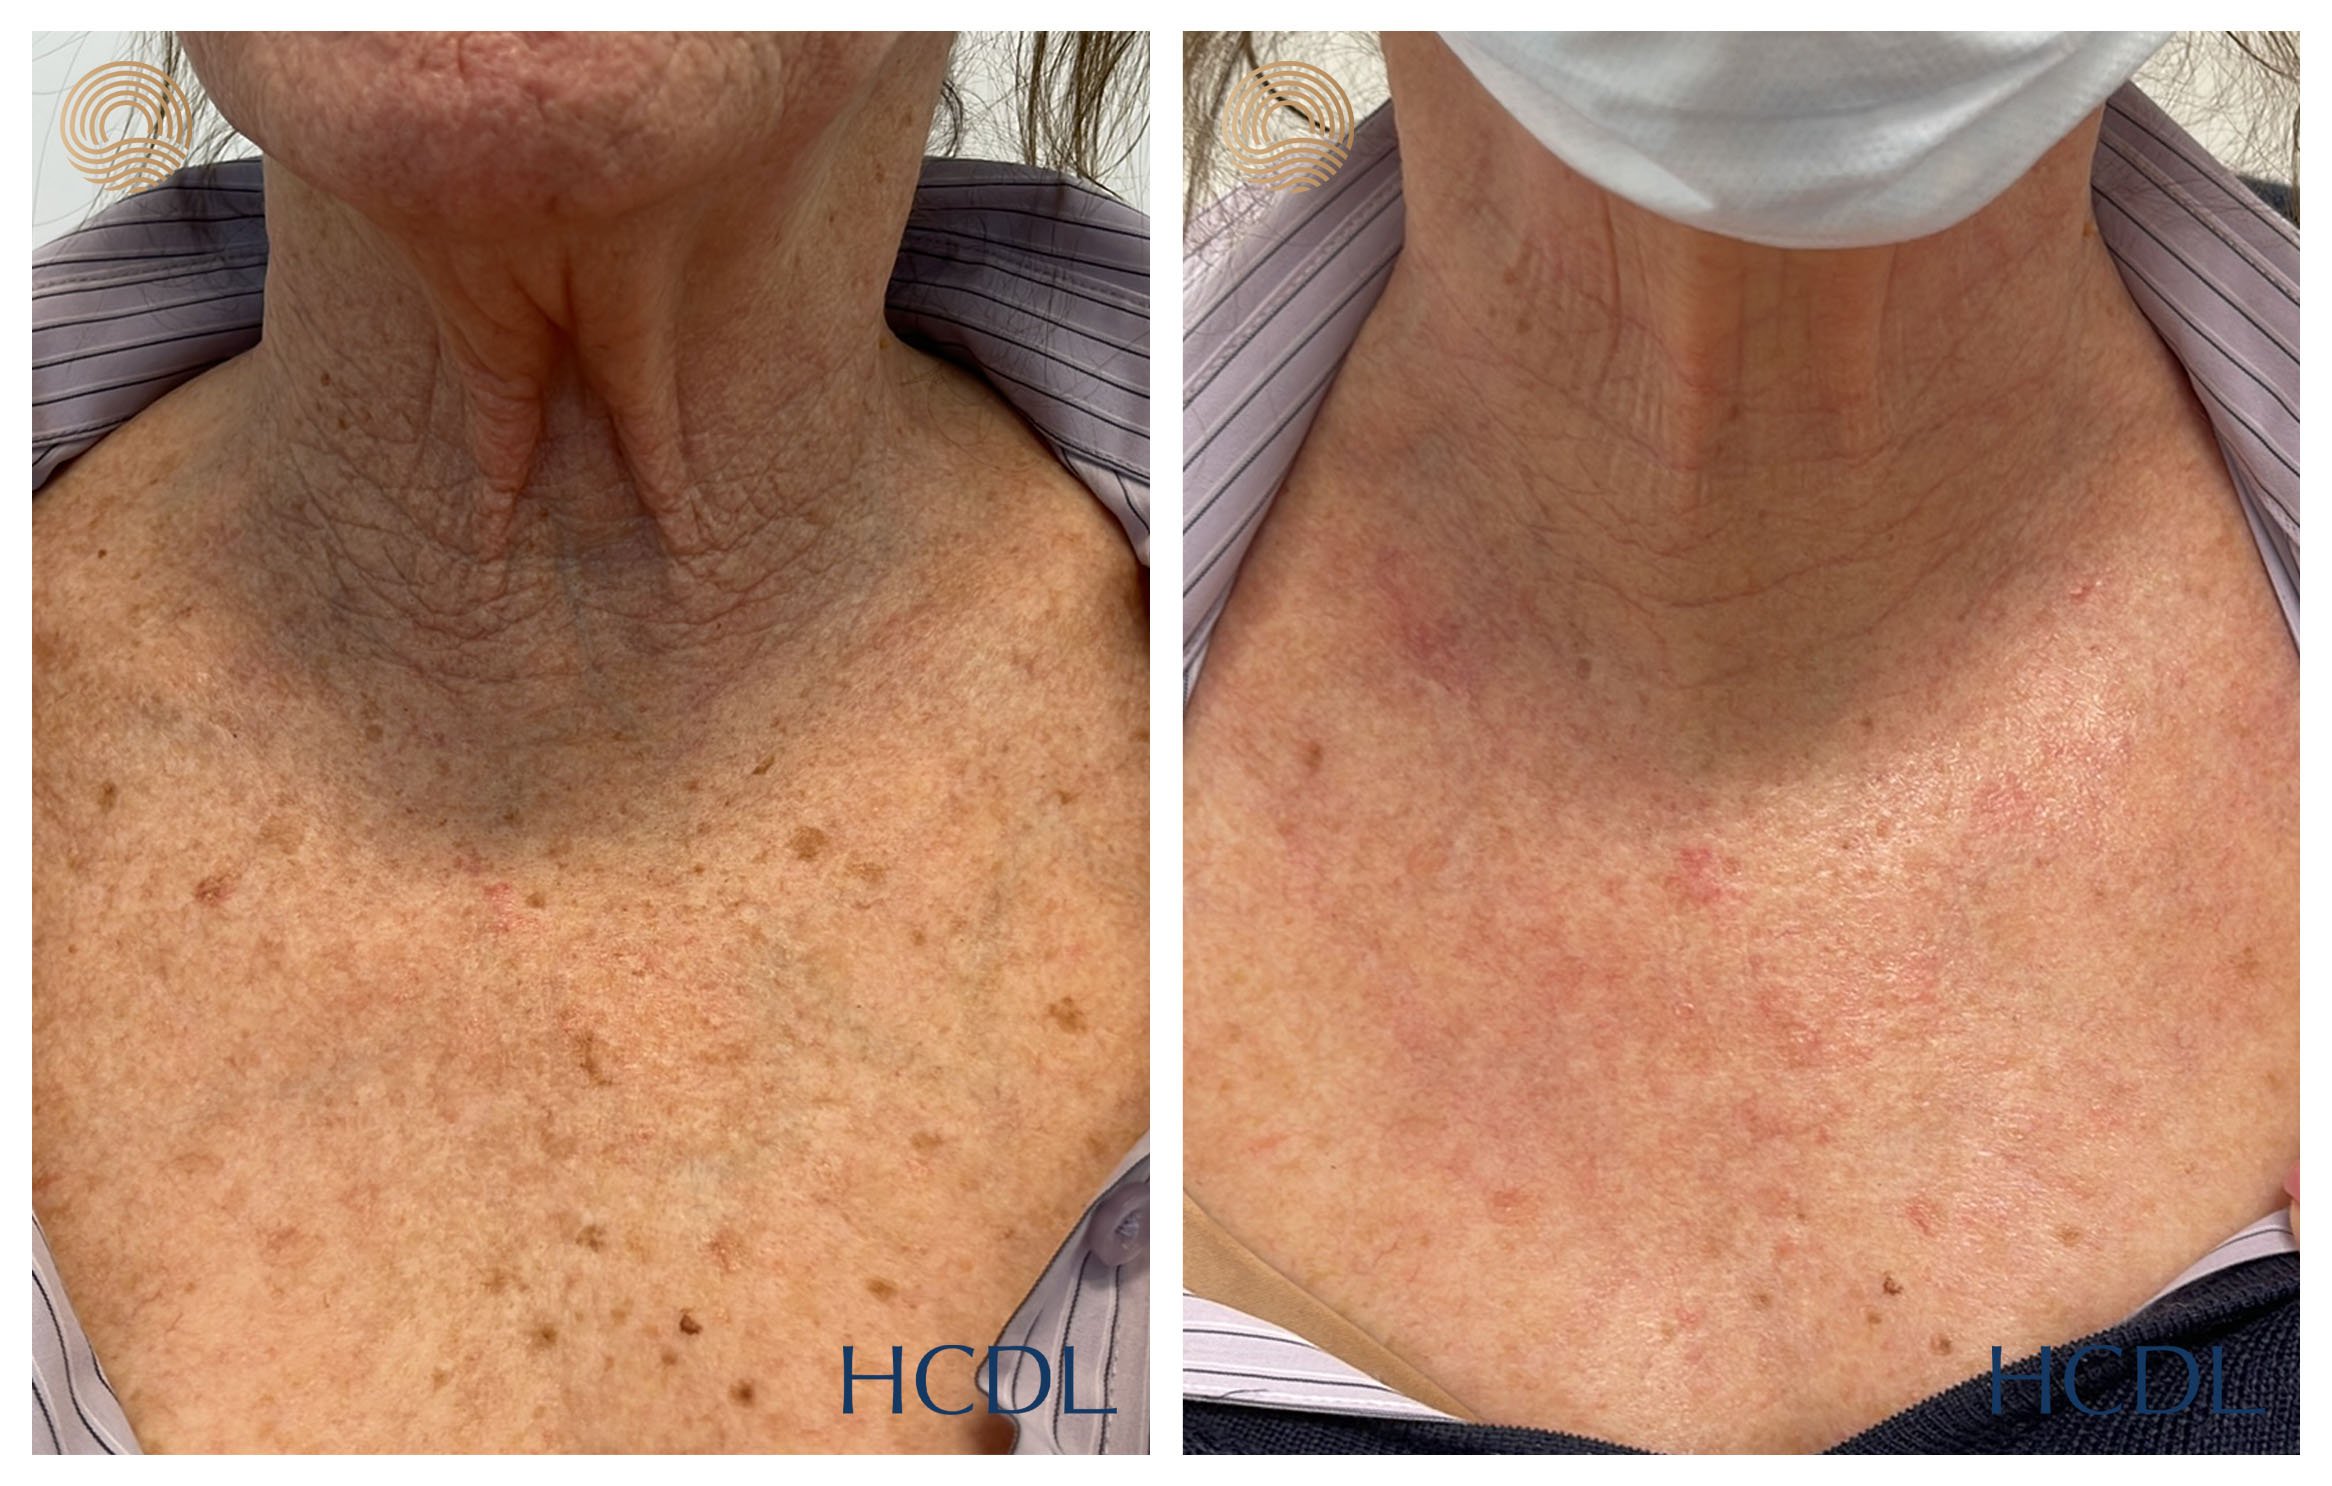 After 1 treatment with the CO2 laser resurfacing for rejuvenation.